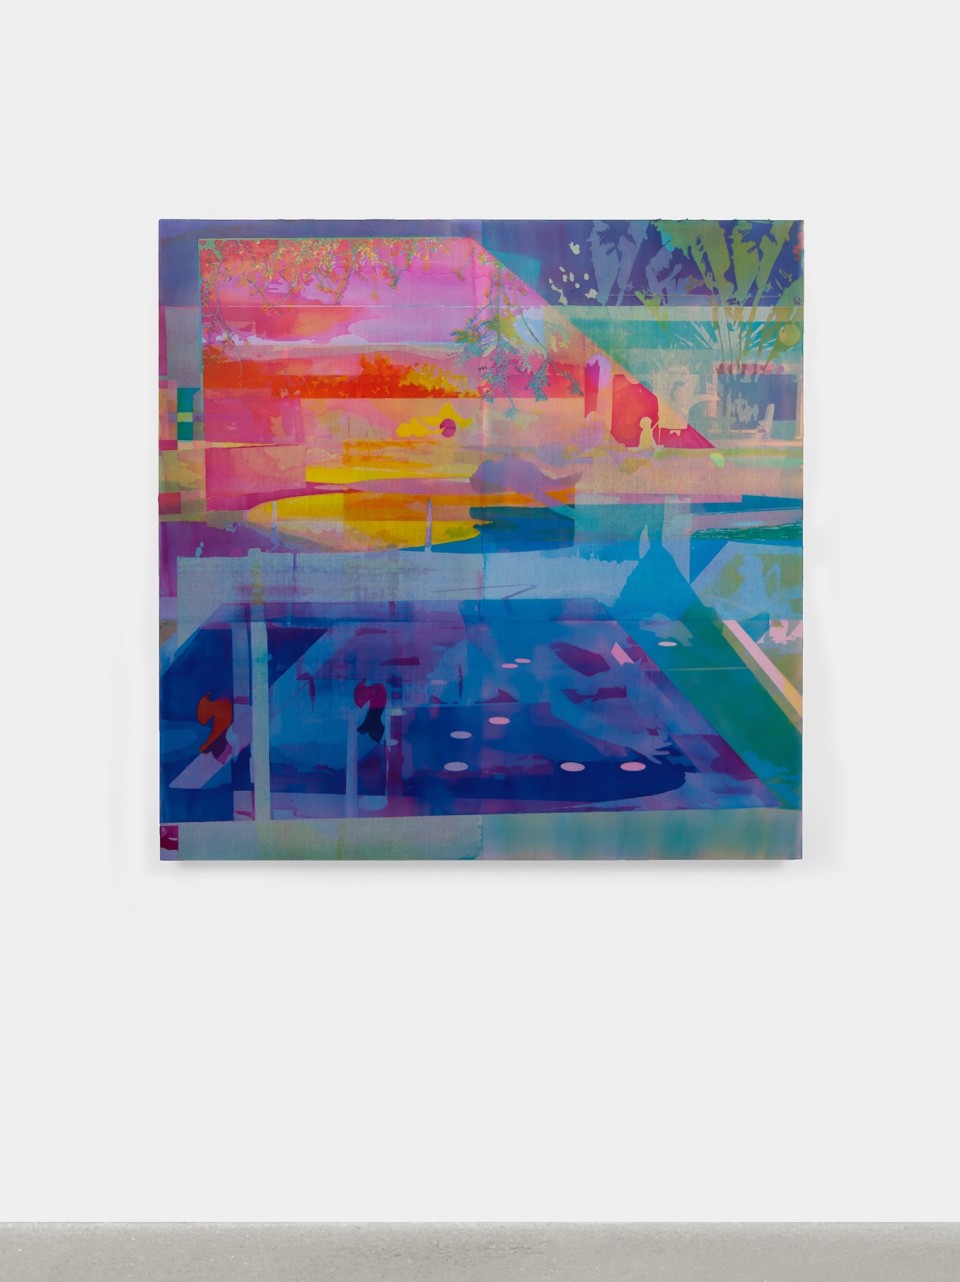 Image: Zoe Walsh  Prism and Lens, 2020  signed and dated verso  acrylic on canvas-wrapped panel  48 x 48 inches (121.9 x 121.9 cm)